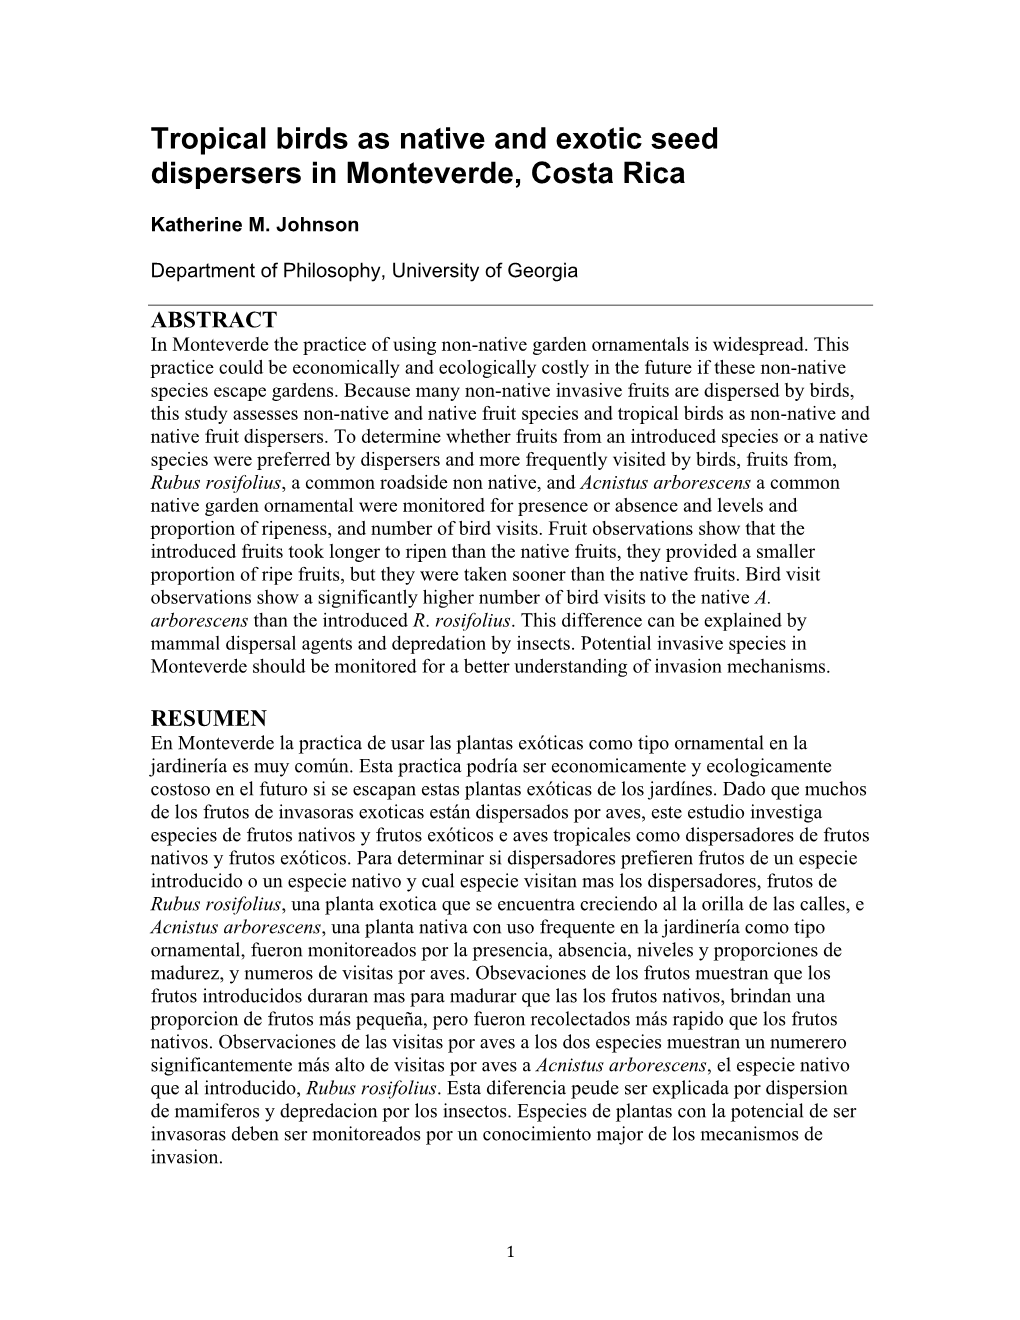 Tropical Birds As Native and Exotic Seed Dispersers in Monteverde, Costa Rica